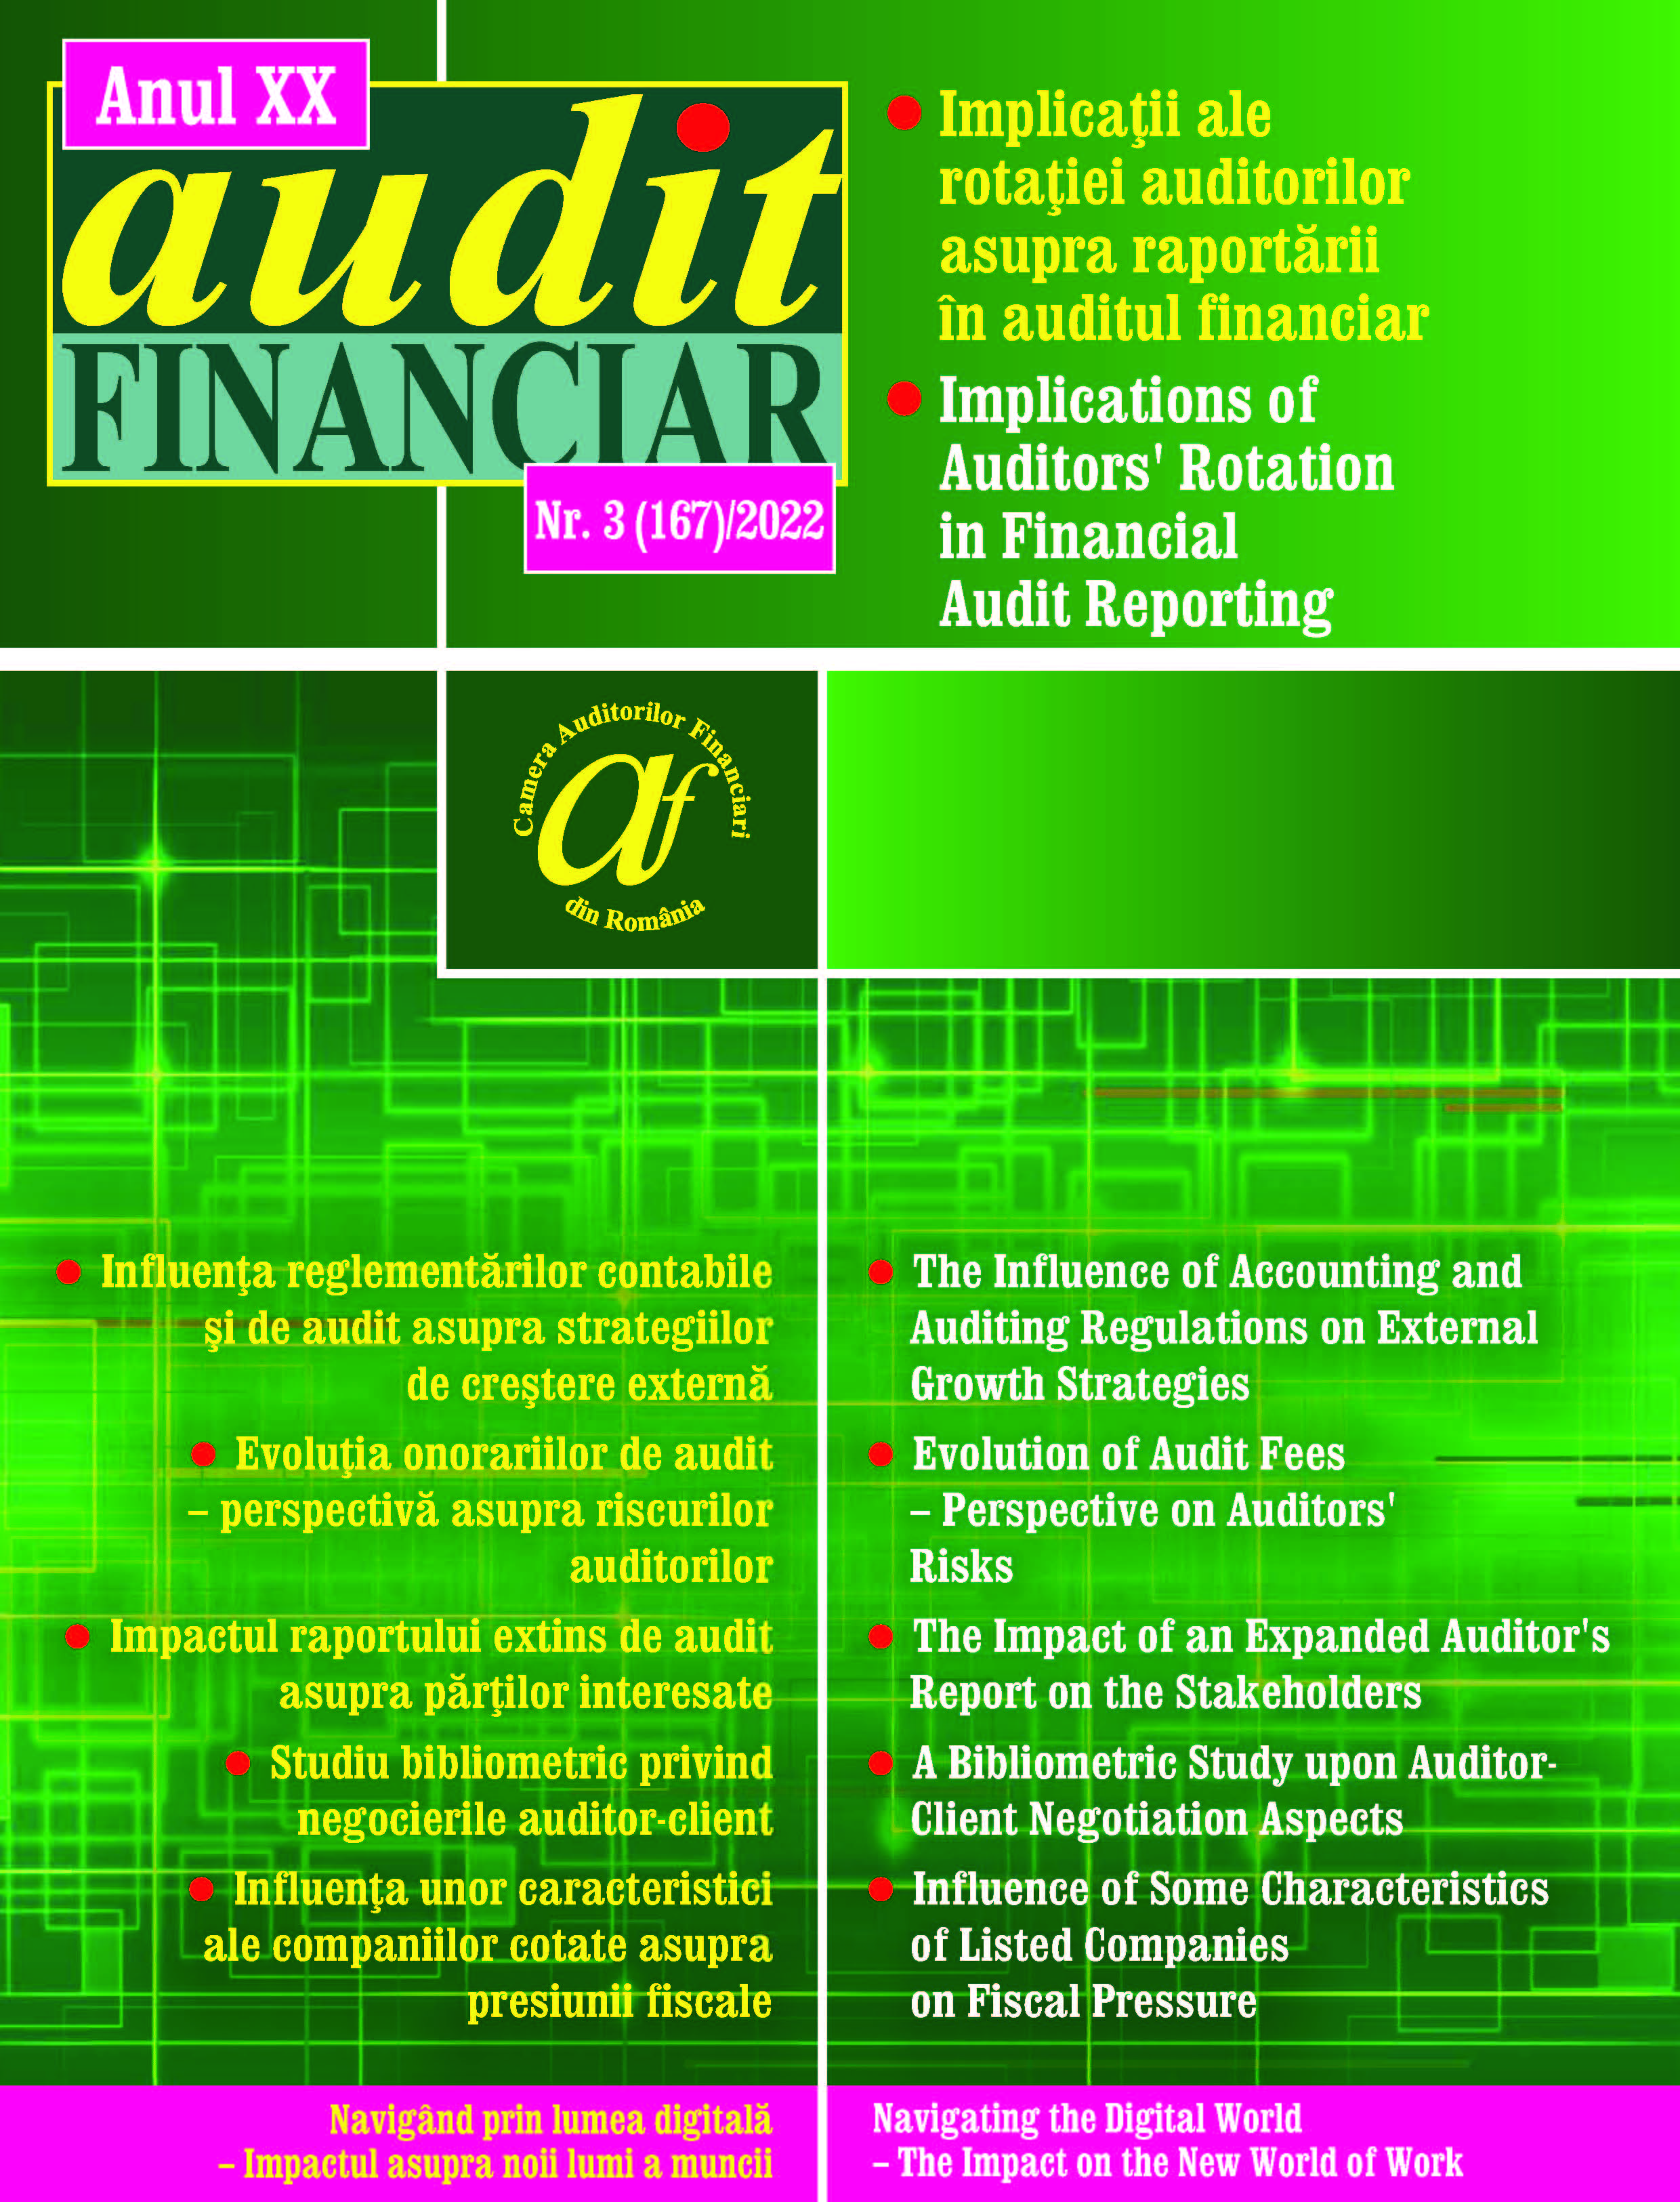 A Bibliometric Study upon Auditor-Client Negotiation Aspects Cover Image